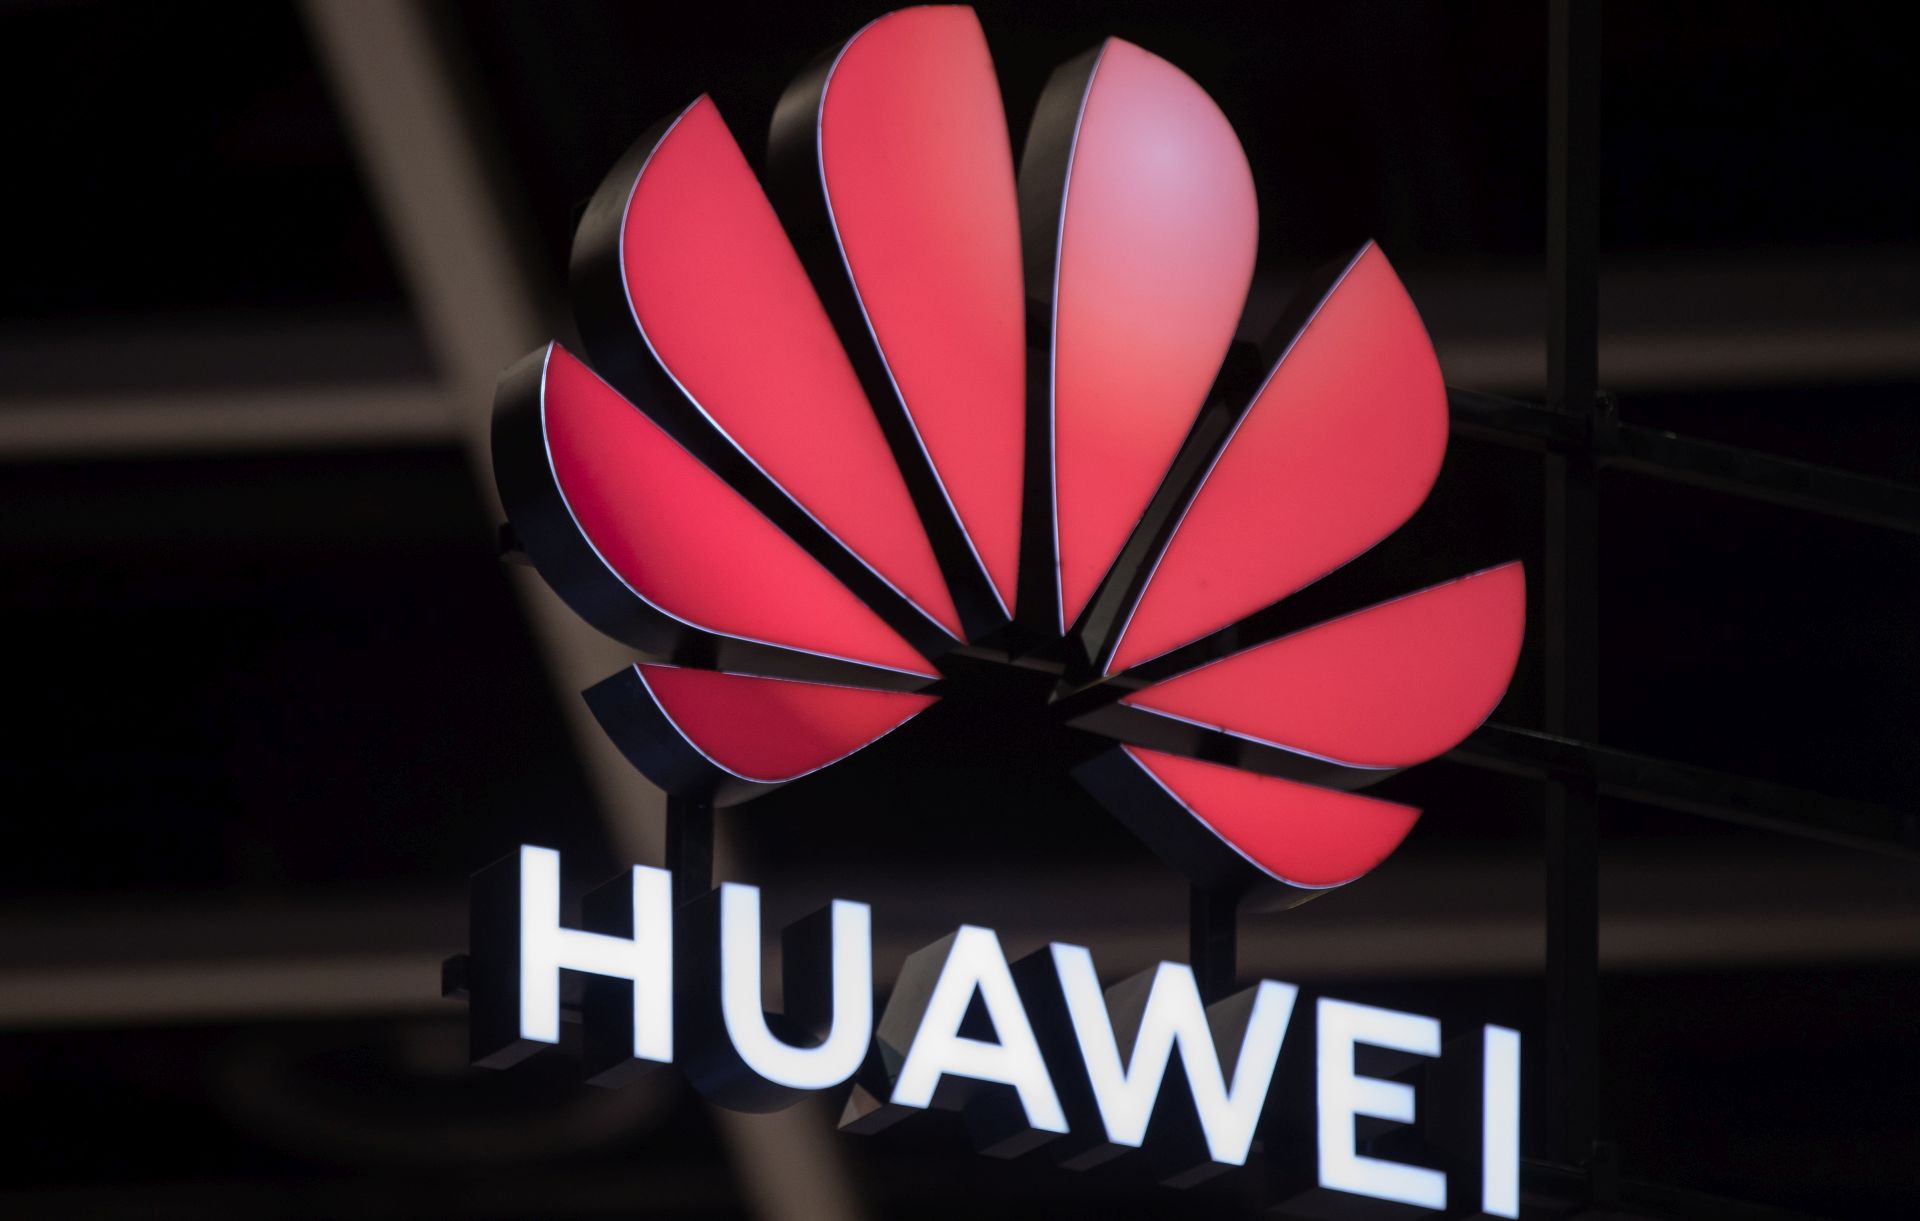 epa07590630 The Huawei Technologies Co., Ltd. logo is displayed at the company's booth during the Cloud Expo Asia 2019 in Hong Kong, China, 22 May 2019. The expo runs through 23 May.  EPA/JEROME FAVRE